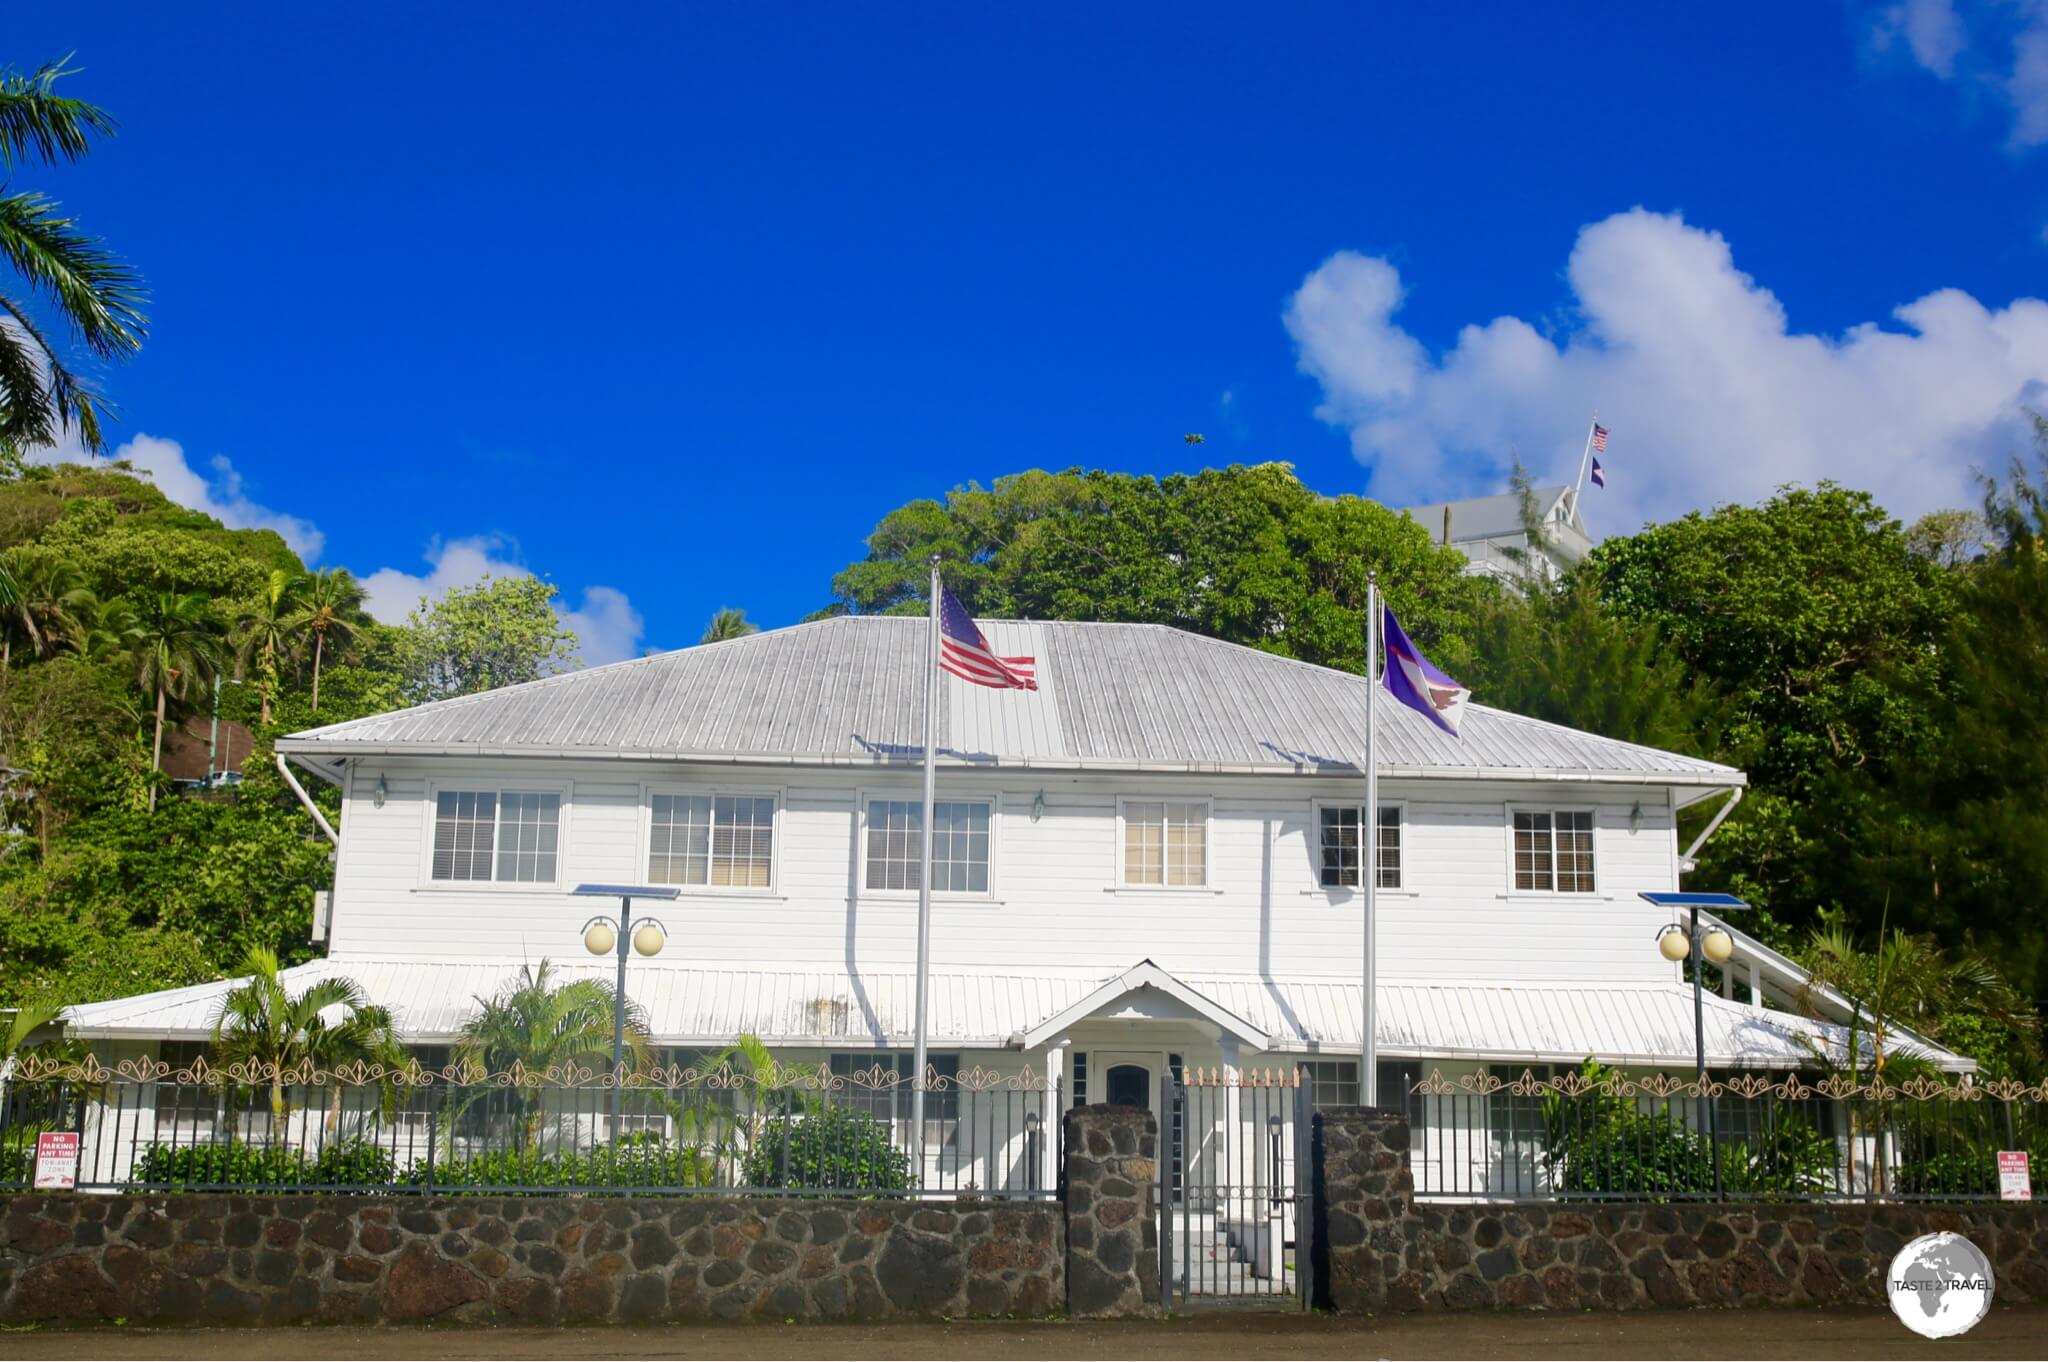 The 'official' residence of the Deputy Governor, with the Governor's residence on the hill behind. 